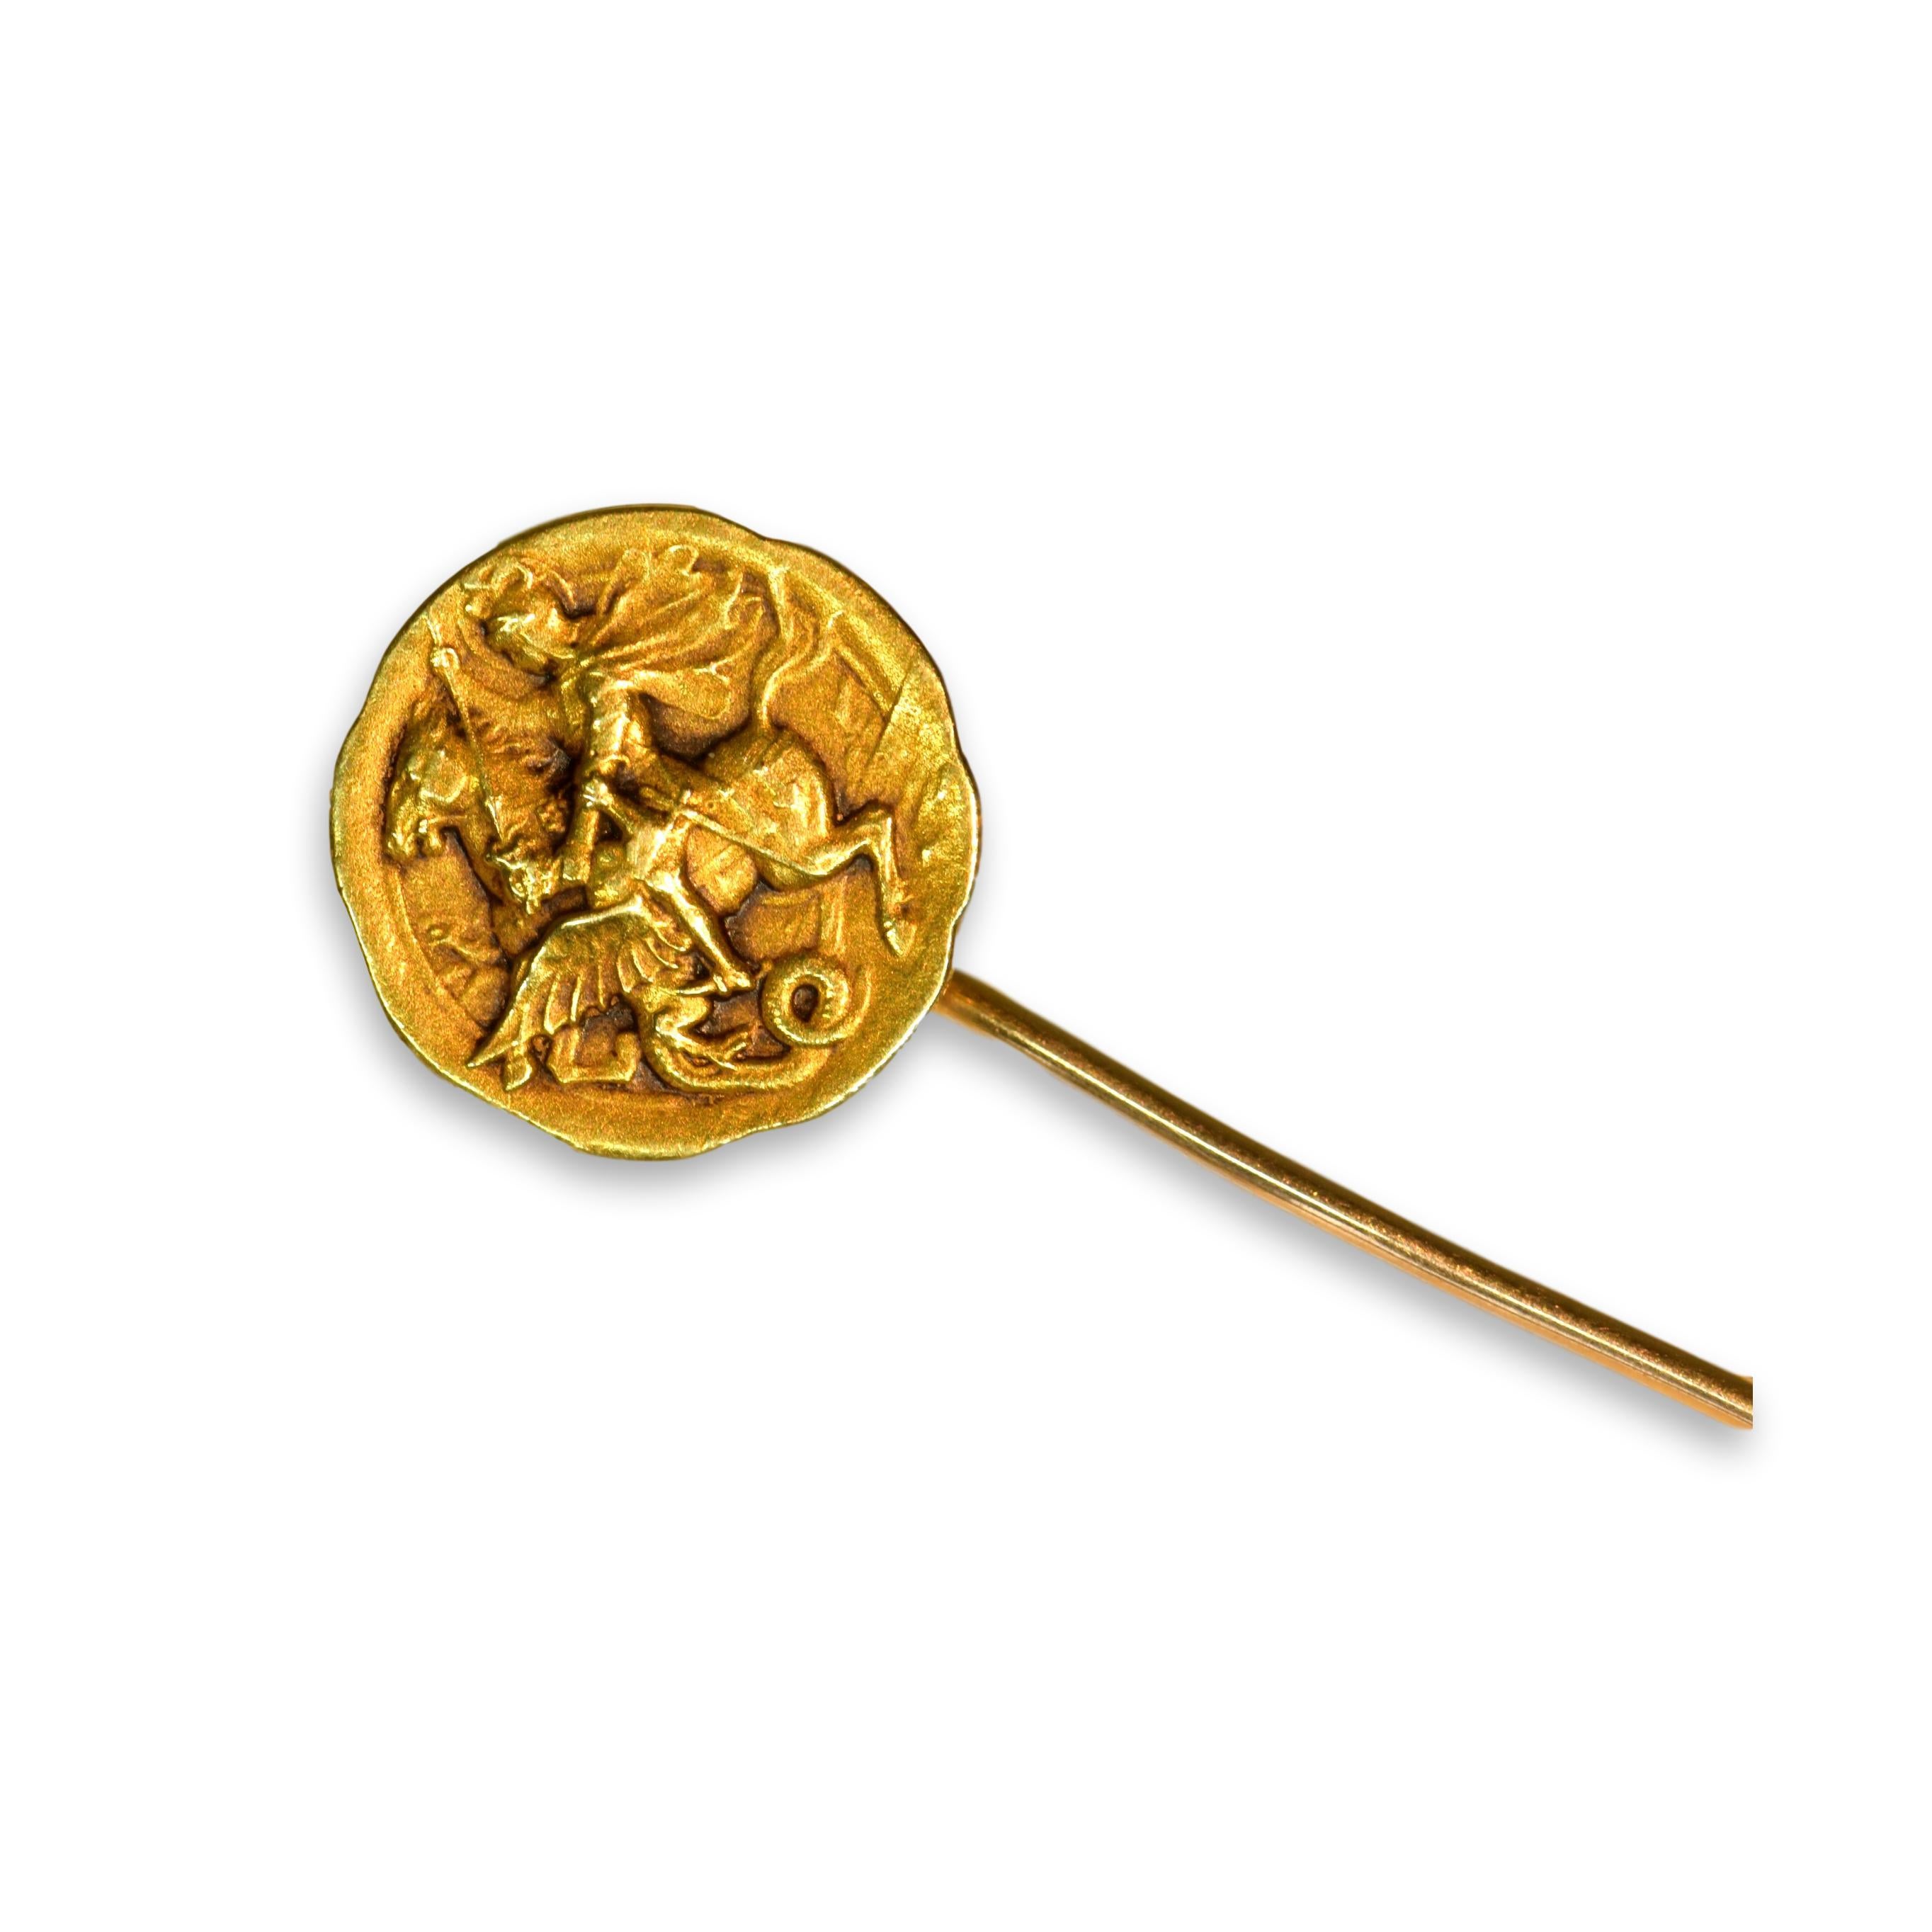 An unusual solid 18ct gold carved tie pin of a goddess riding war horse that was made circa 1890-1910. The detail of the gold work is brilliant.  Typical very fine gold work of Art Nouveau. Perfect condition. 

Weight: 3g
Length: 6cm
Width: 13mm

We